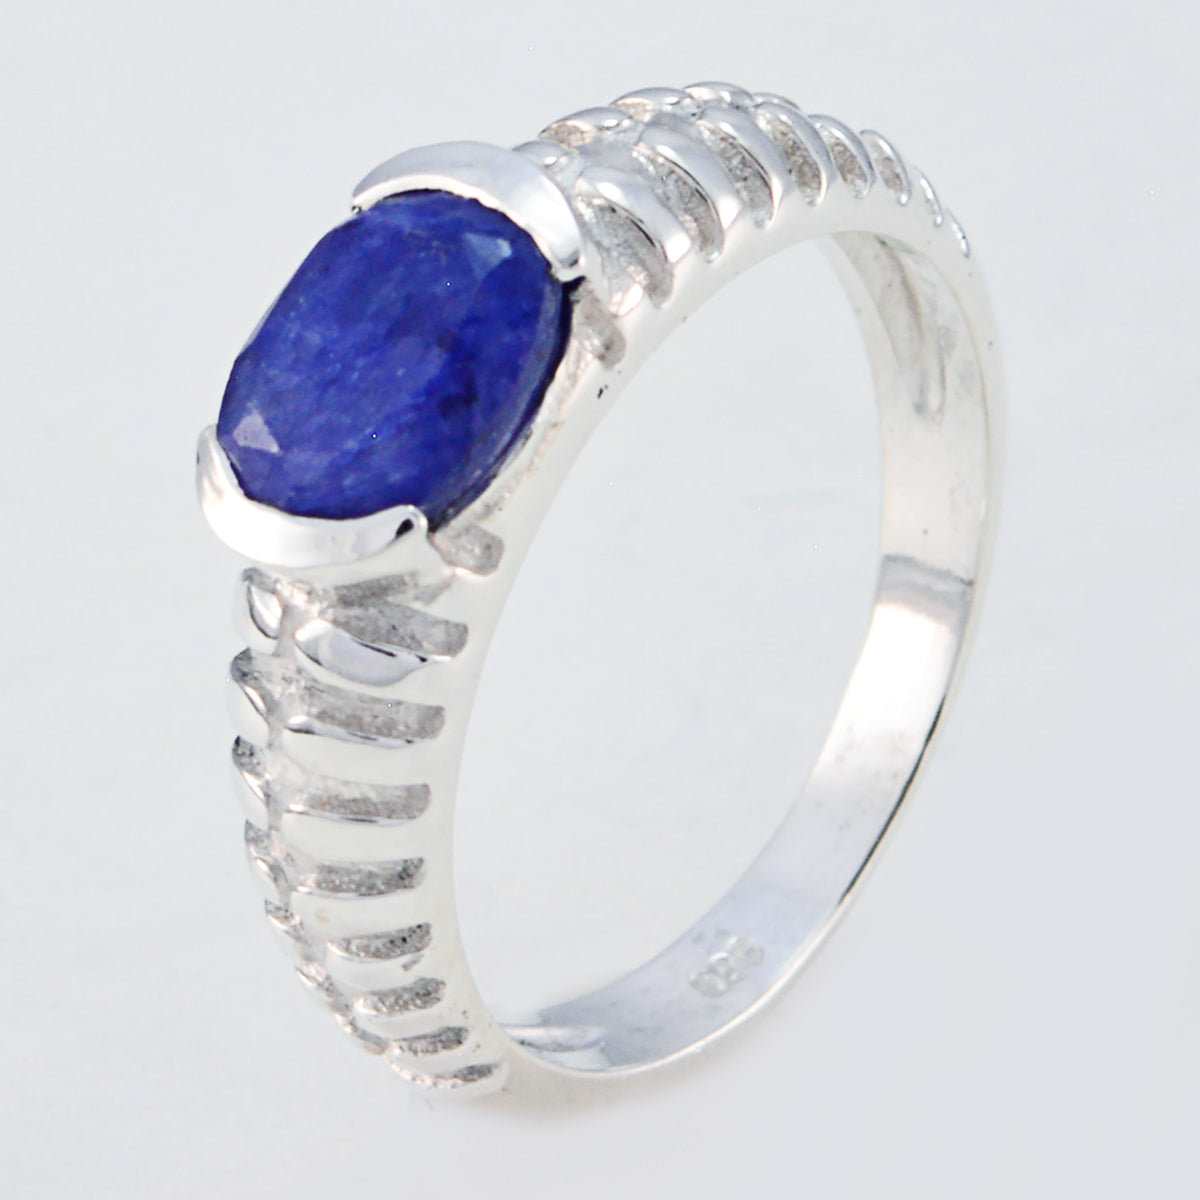 Dollish Gemstones Indiansapphire 925 Silver Rings Jewelry Suppliers